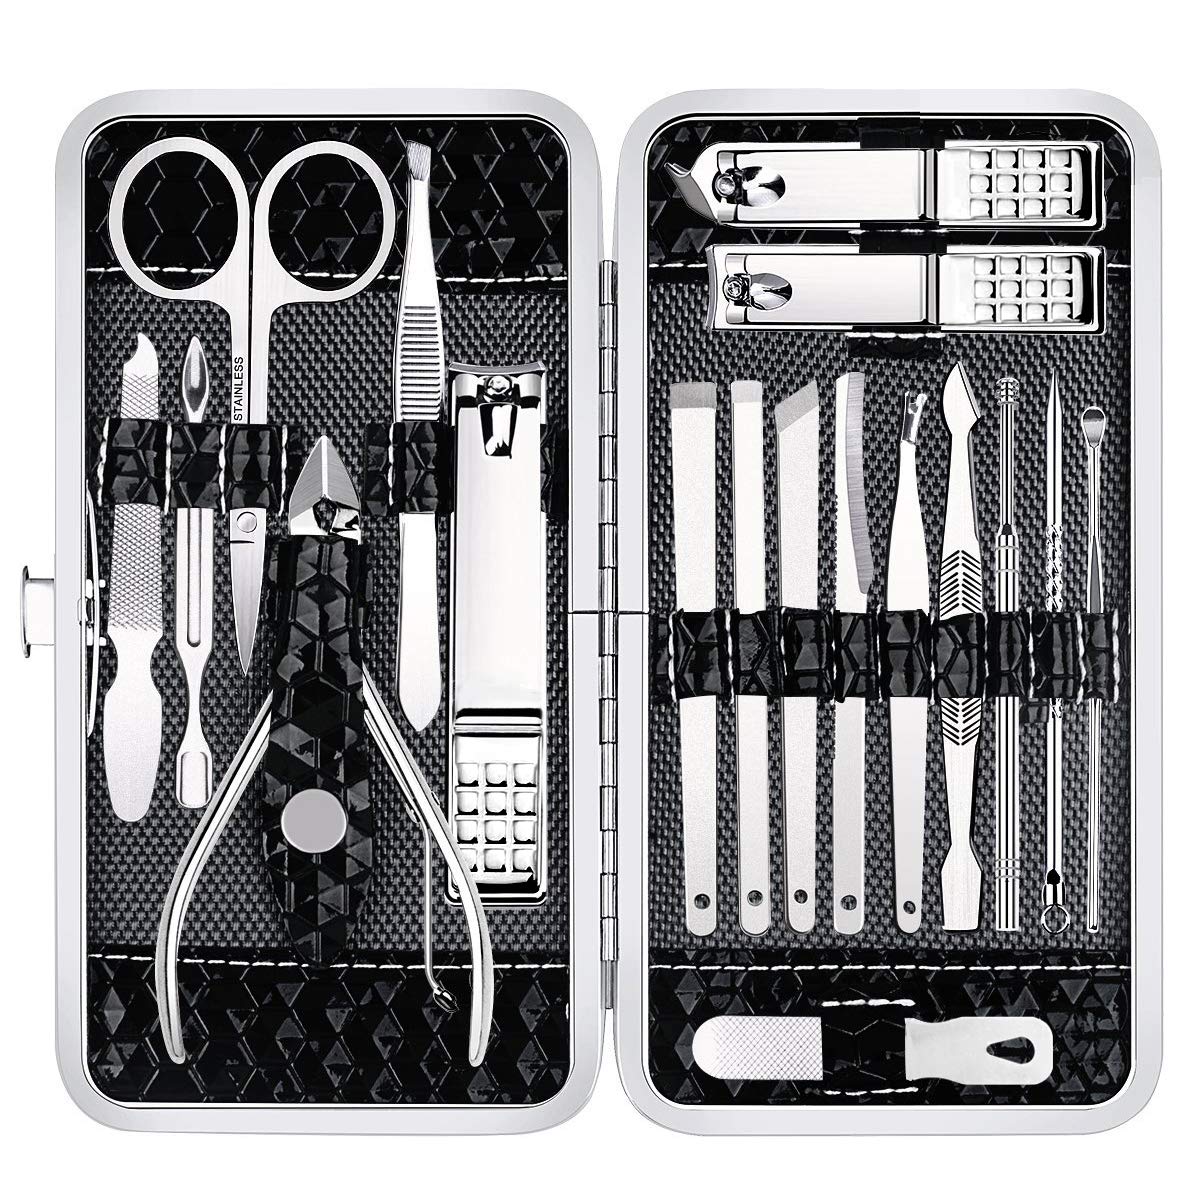 Yougai Stainless Steel Manicure and Pedicure Set